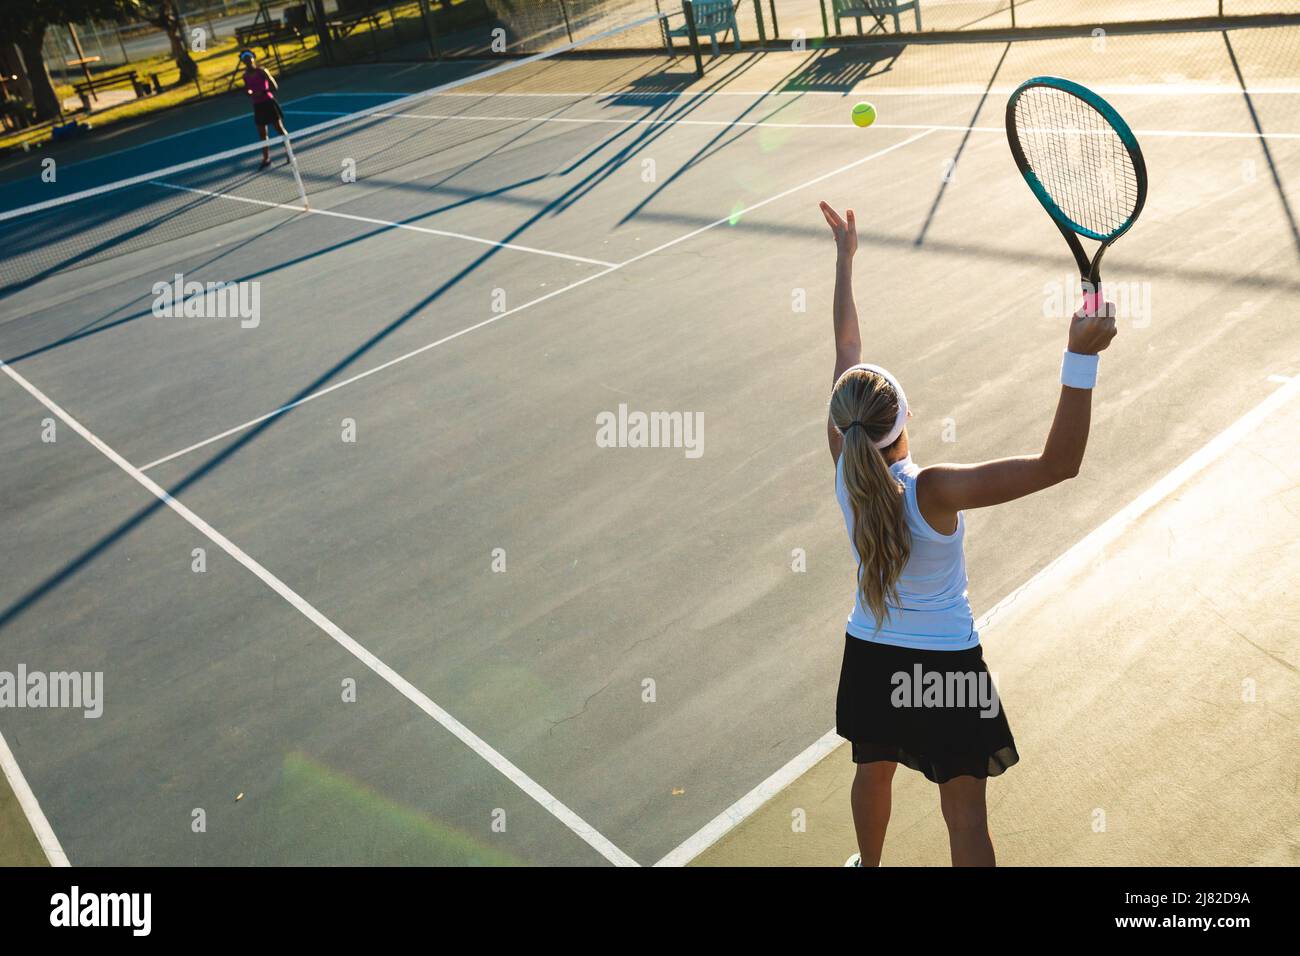 High angle view of young caucasian female tennis player serving during game at court Stock Photo